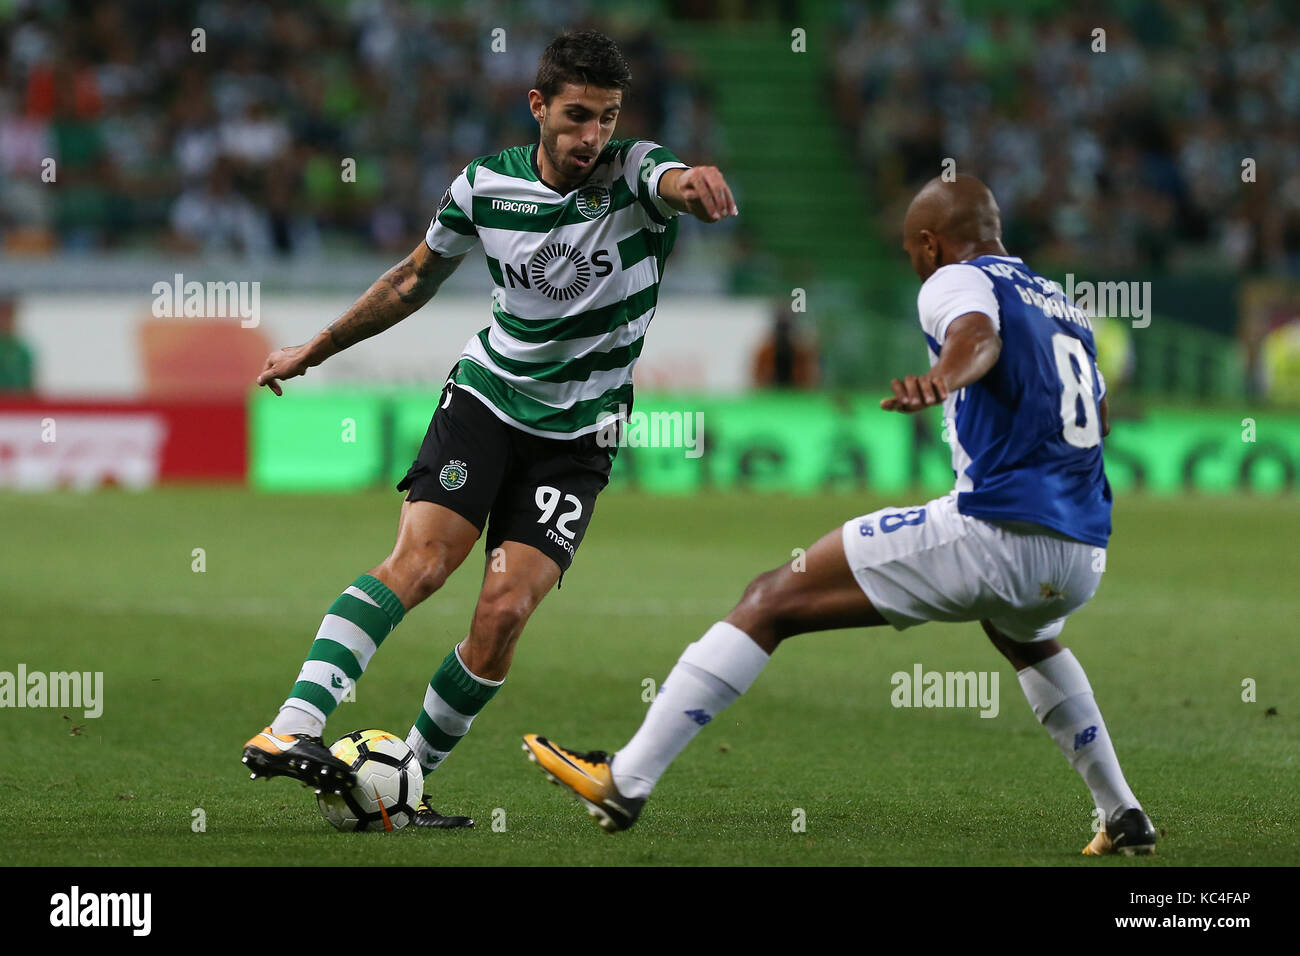 Lisbon, Portugal. 01st Oct, 2017. Sporting«s defender Cristiano Piccini from Italy (L) and FC PortoÕs forward Yacine Brahimi from Algeria (R) during Premier League 2017/18 match between Sporting CP and FC Porto, at Alvalade Stadium in Lisbon on October 1, 2017. (Photo by Bruno Barros / DPI) Credit: Bruno Barros/Alamy Live News Stock Photo